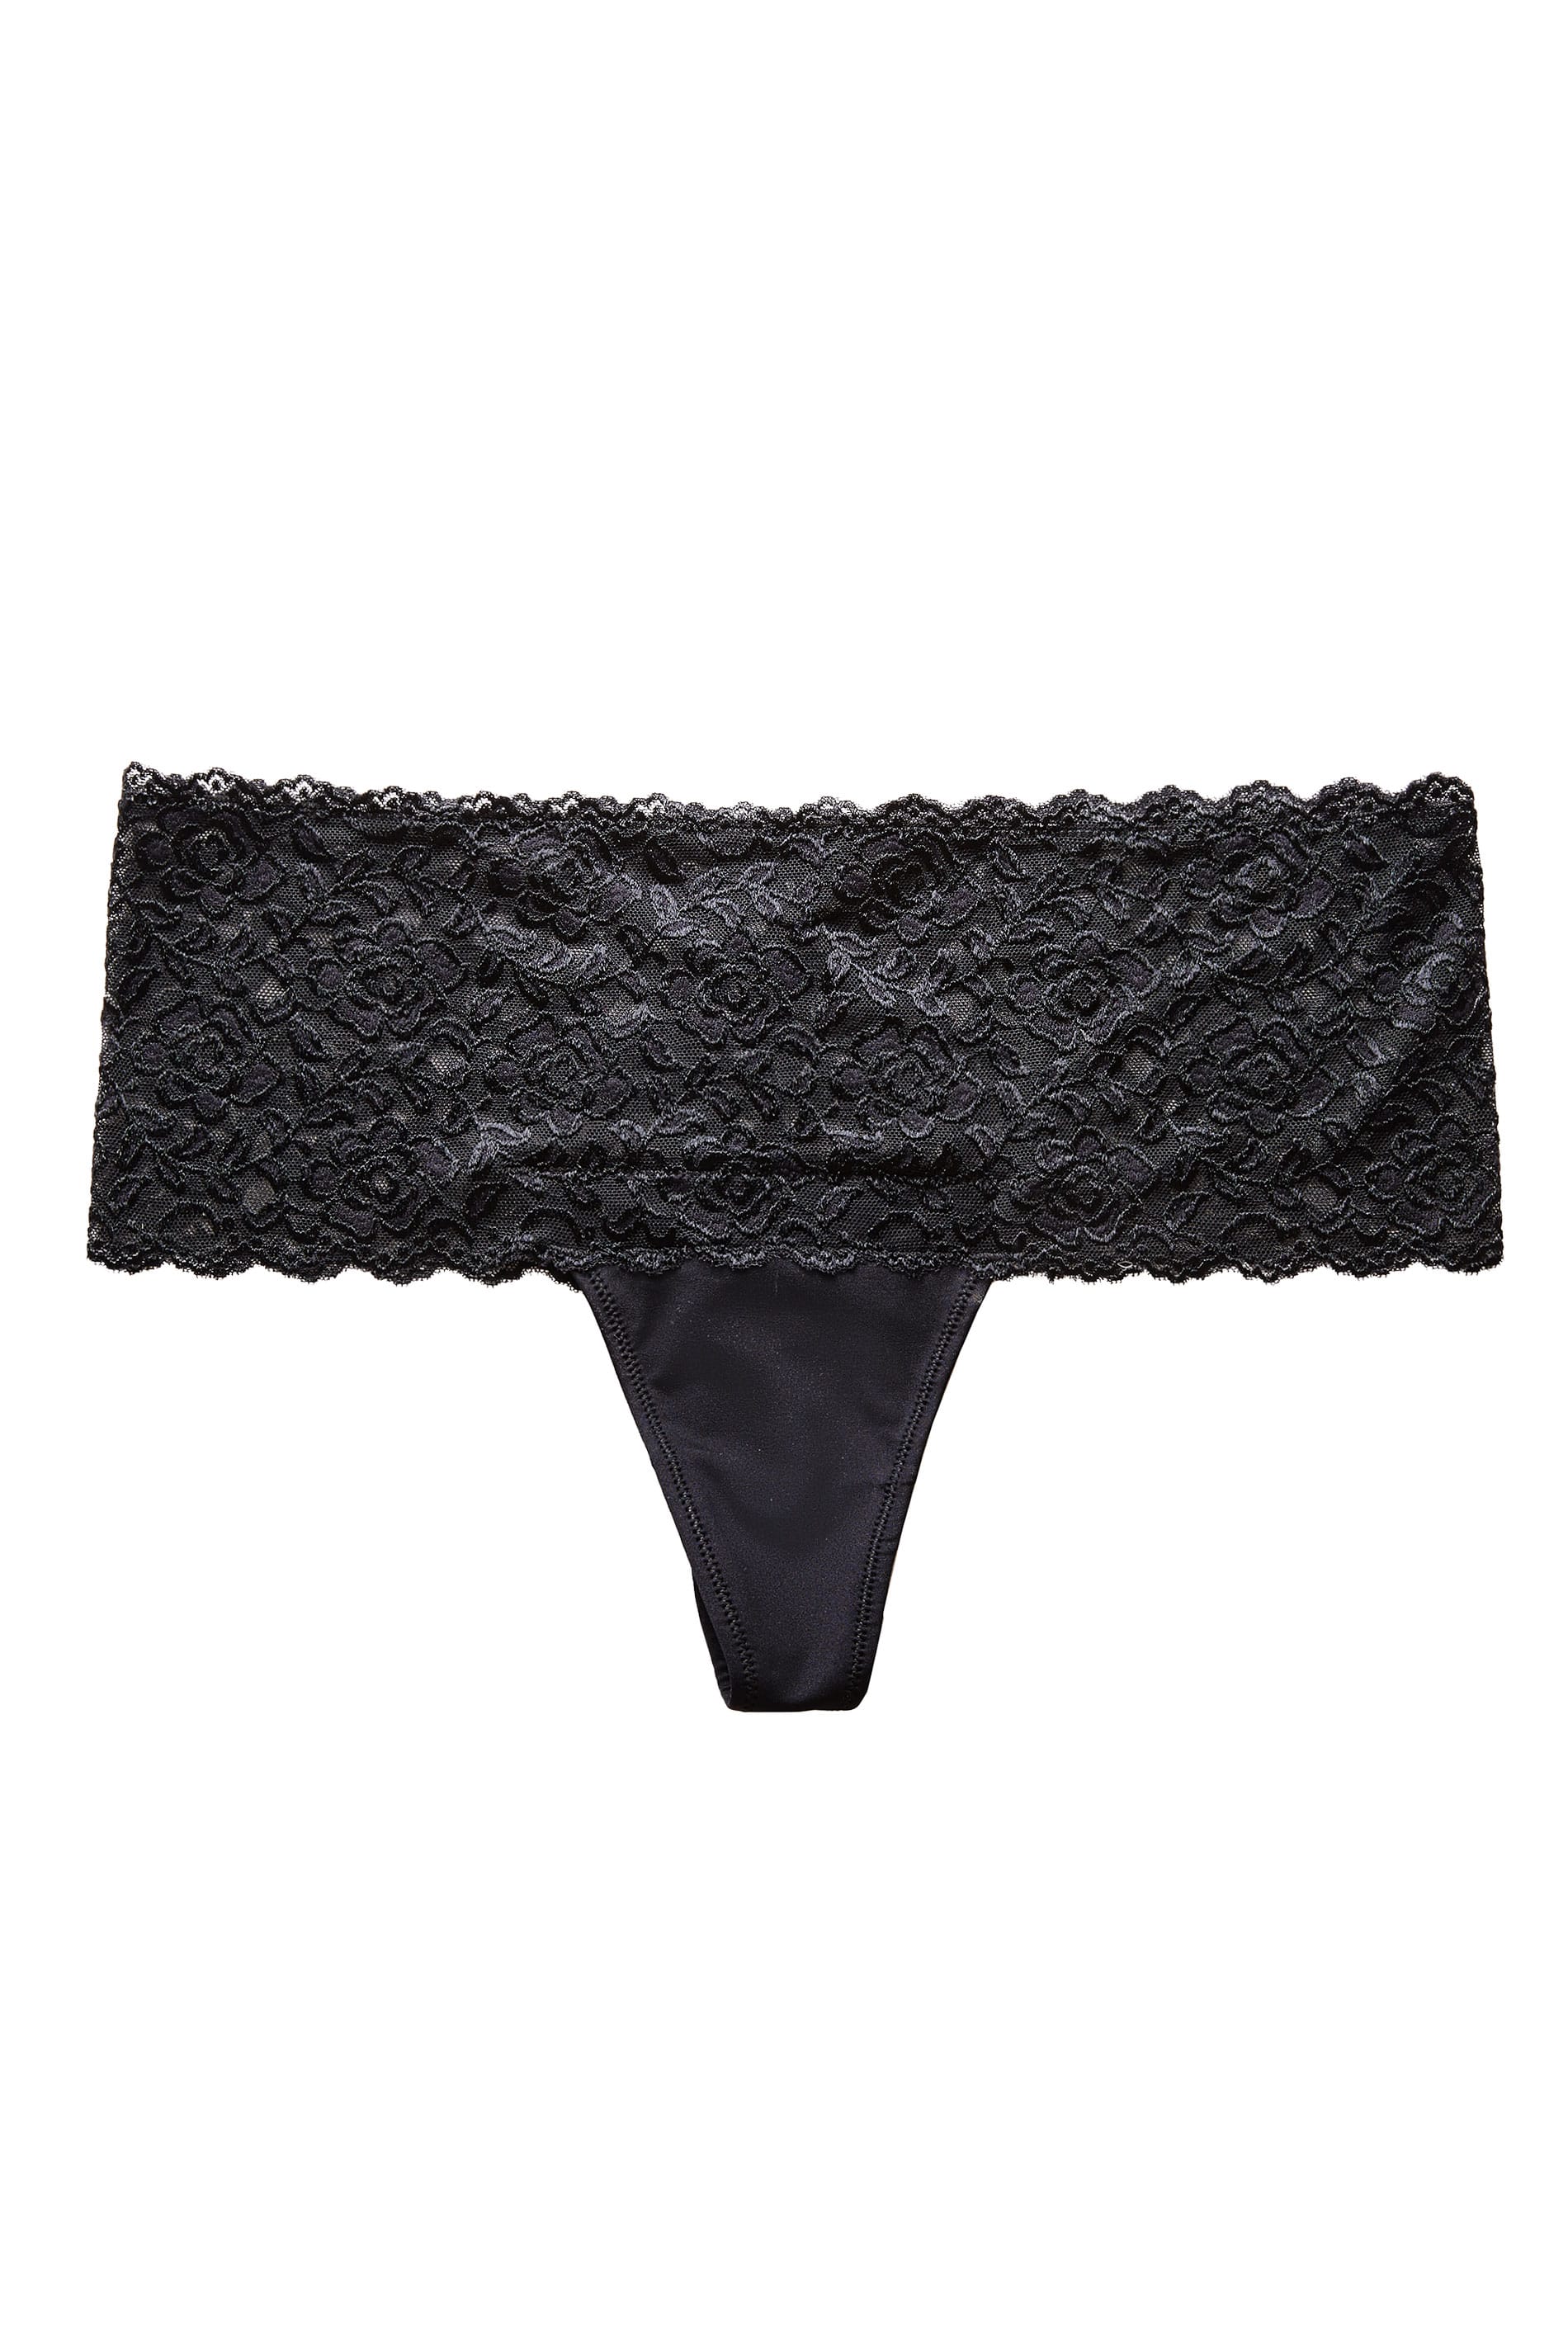 Black Lace Brazilian Knickers | Yours Clothing 3